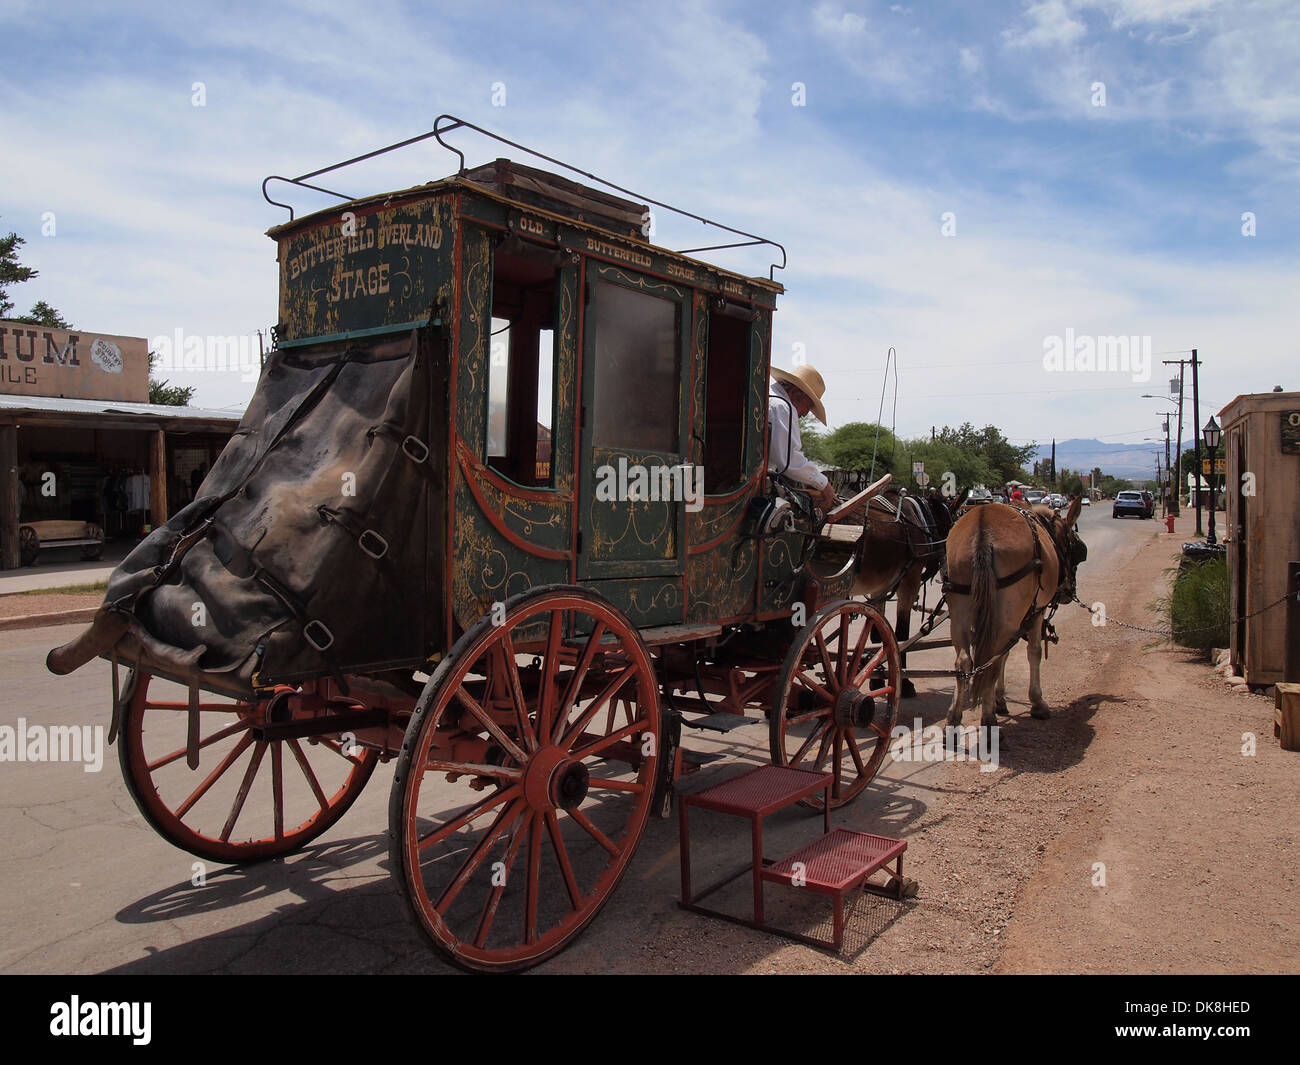 Stagecoach sits ready for tourists in the historical American Old West town of Tombstone, Arizona, USA Stock Photo